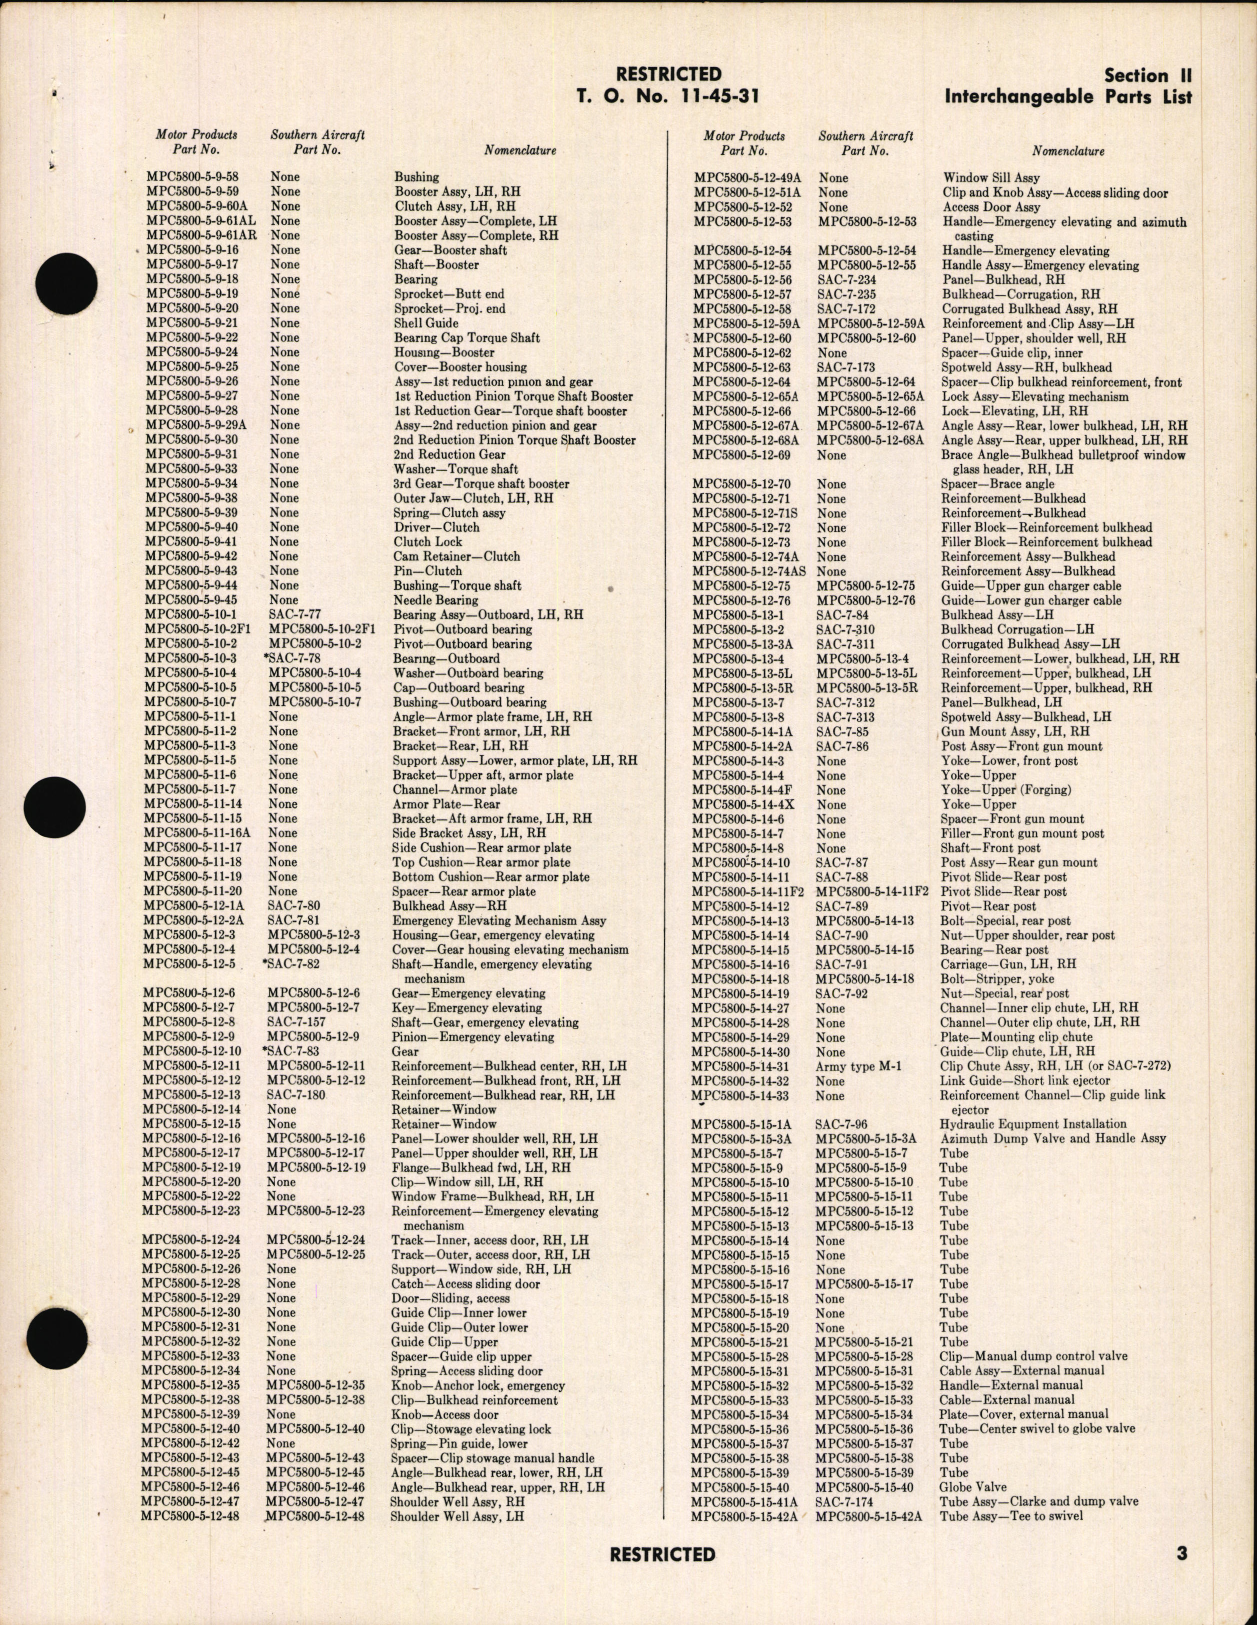 Sample page 5 from AirCorps Library document: Interchangeable Parts List for Type A-6B and A-6C Turrets